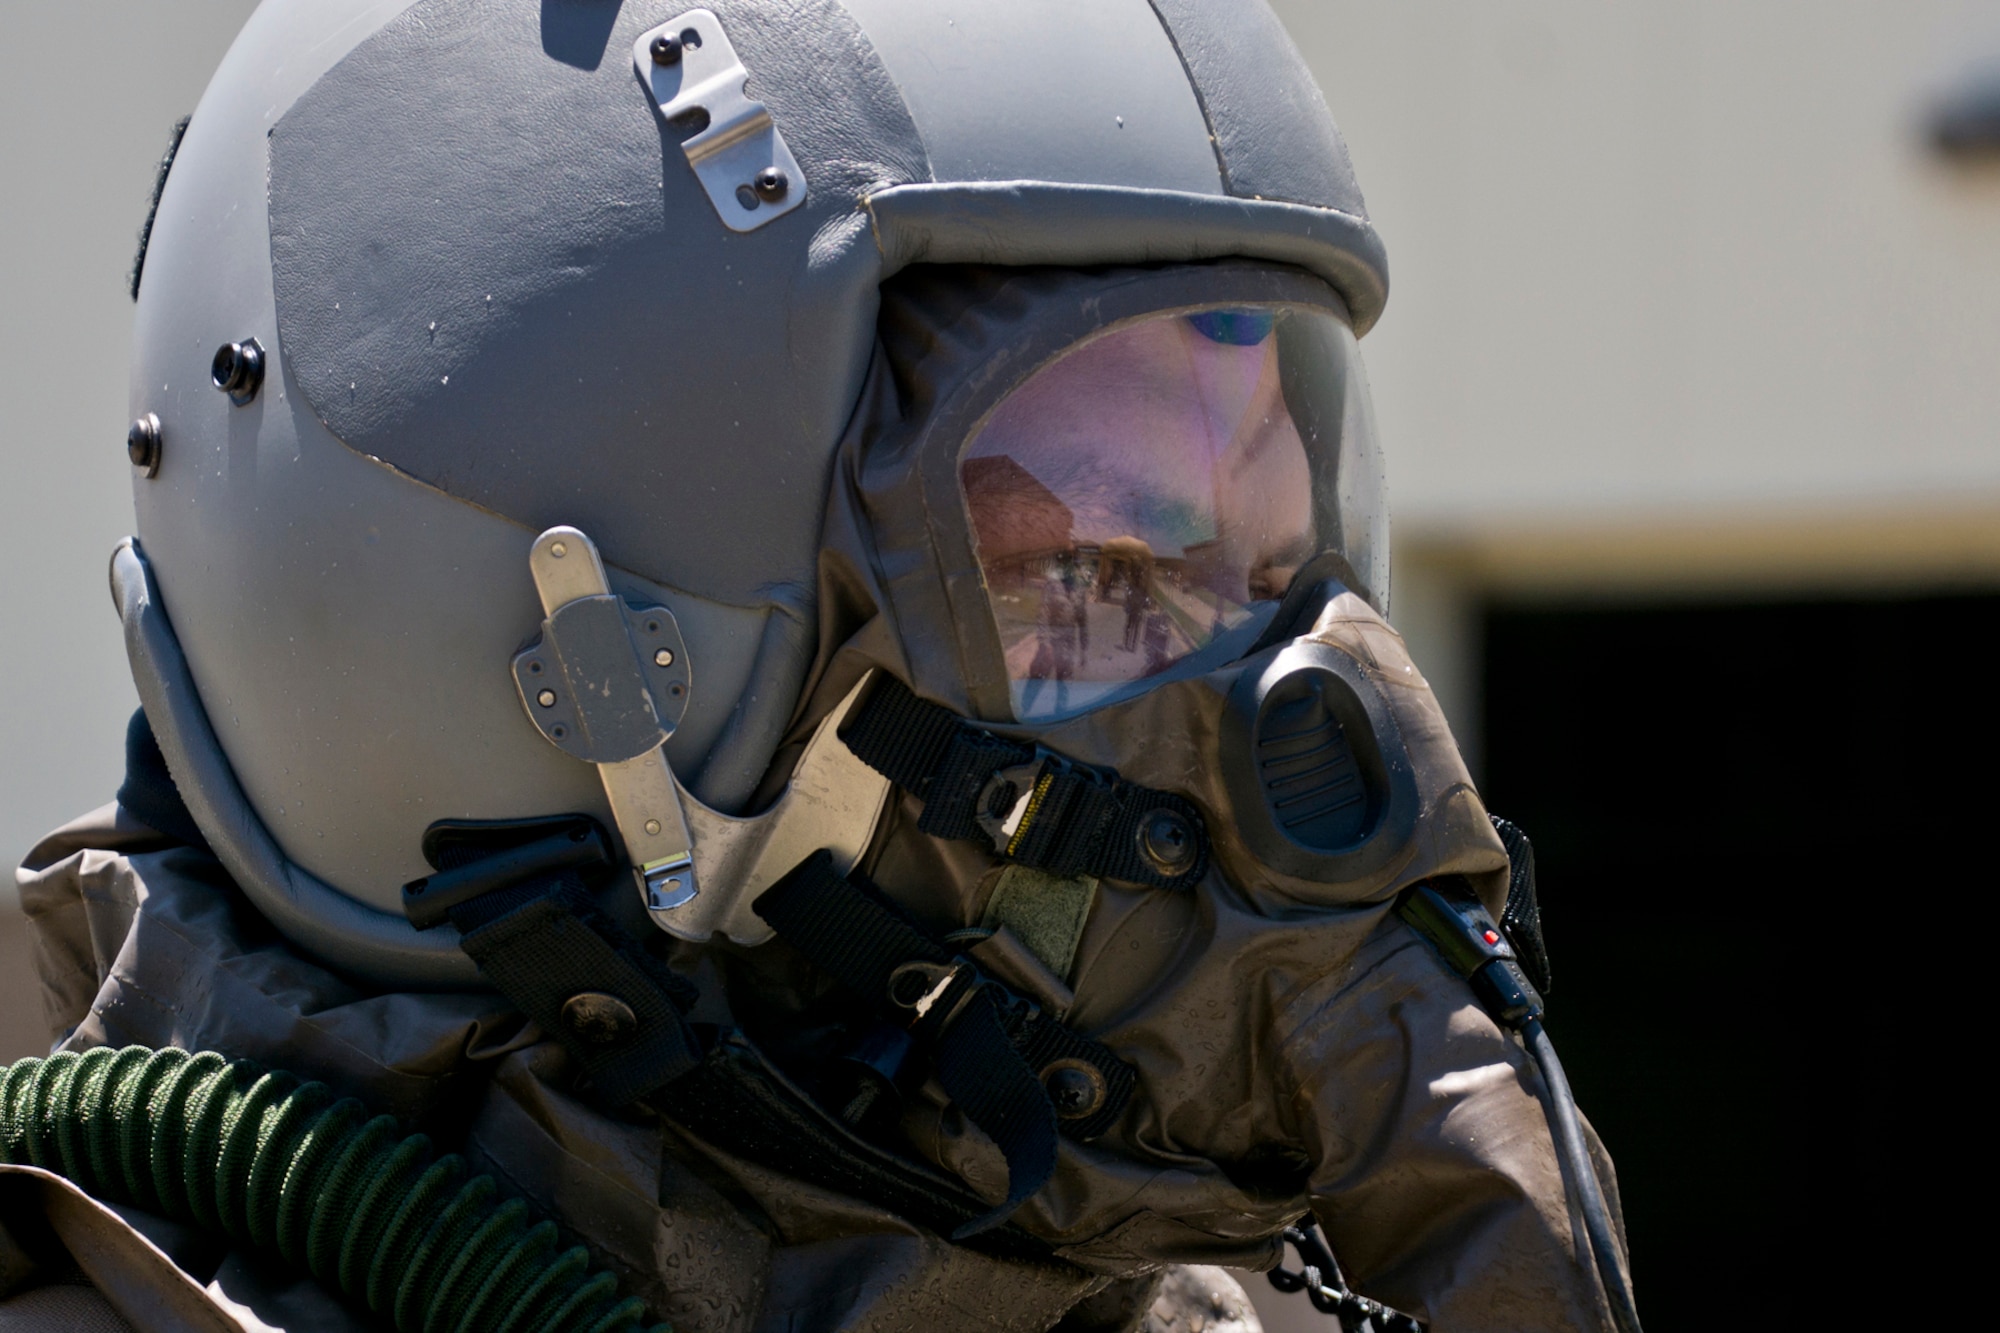 AFE technicians conduct CBRN training > 913th Airlift Group > News